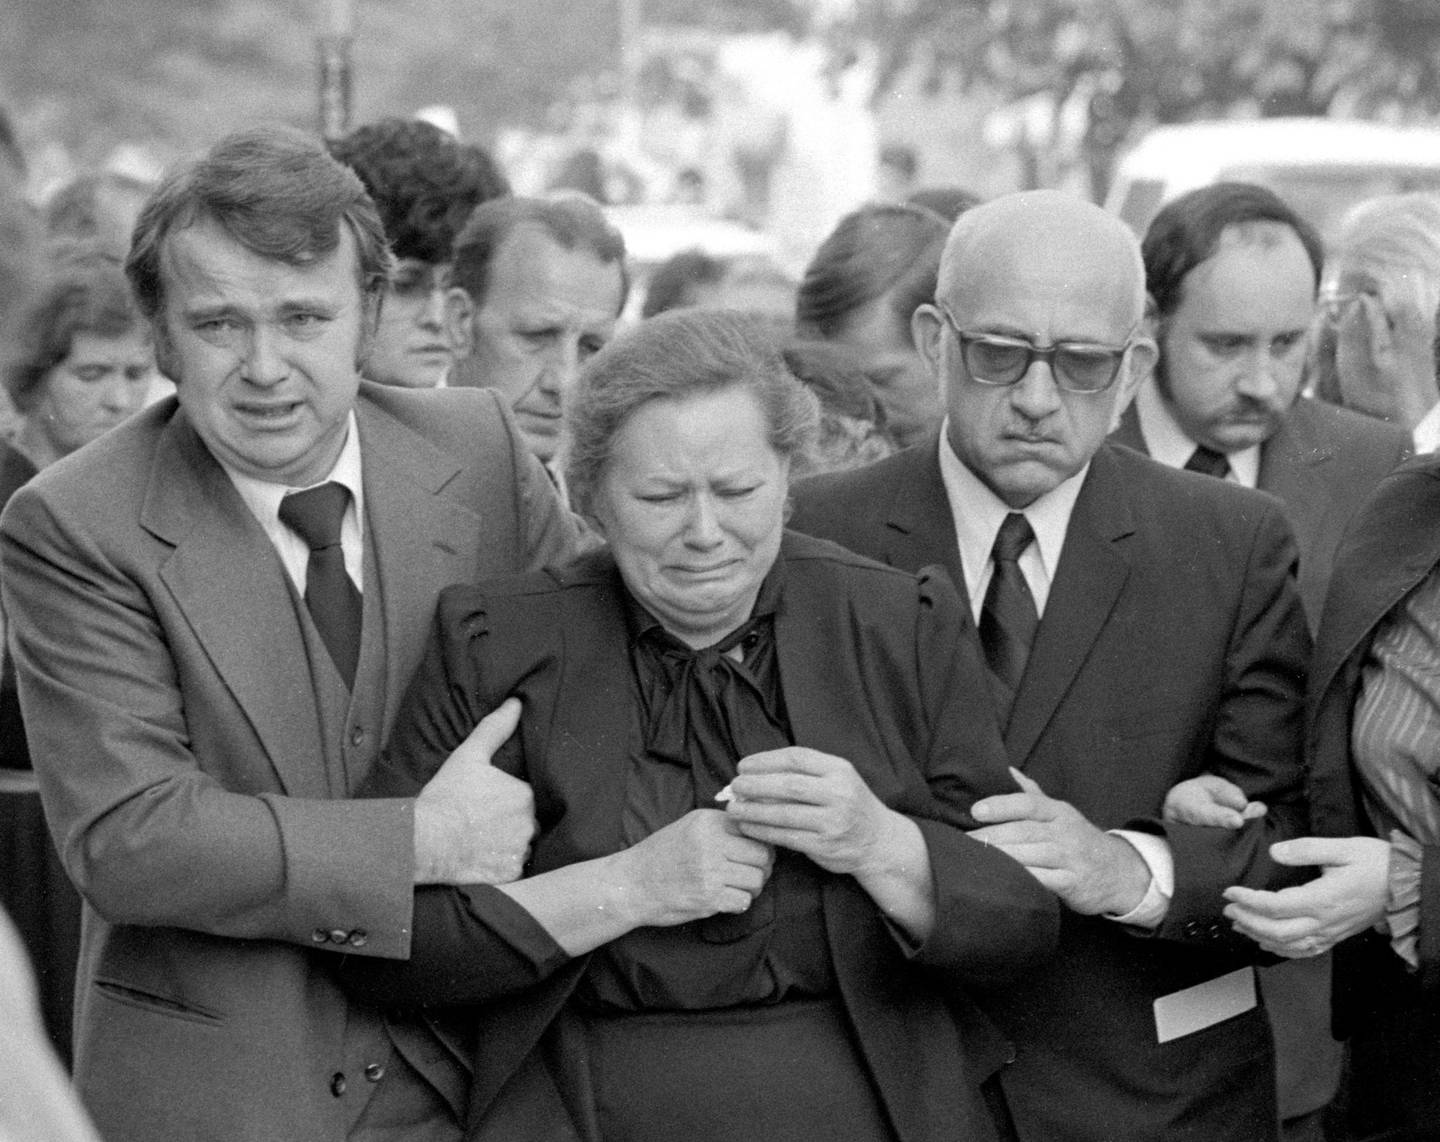 Alojza and Tadeusz Janus, center and right, grieve outside St. Hyacinth Catholic Church in Chicago, which hosted the 1982 funeral for their sons Adam and Stanley and daughter-in-law Theresa. Their son Joseph is behind at right.